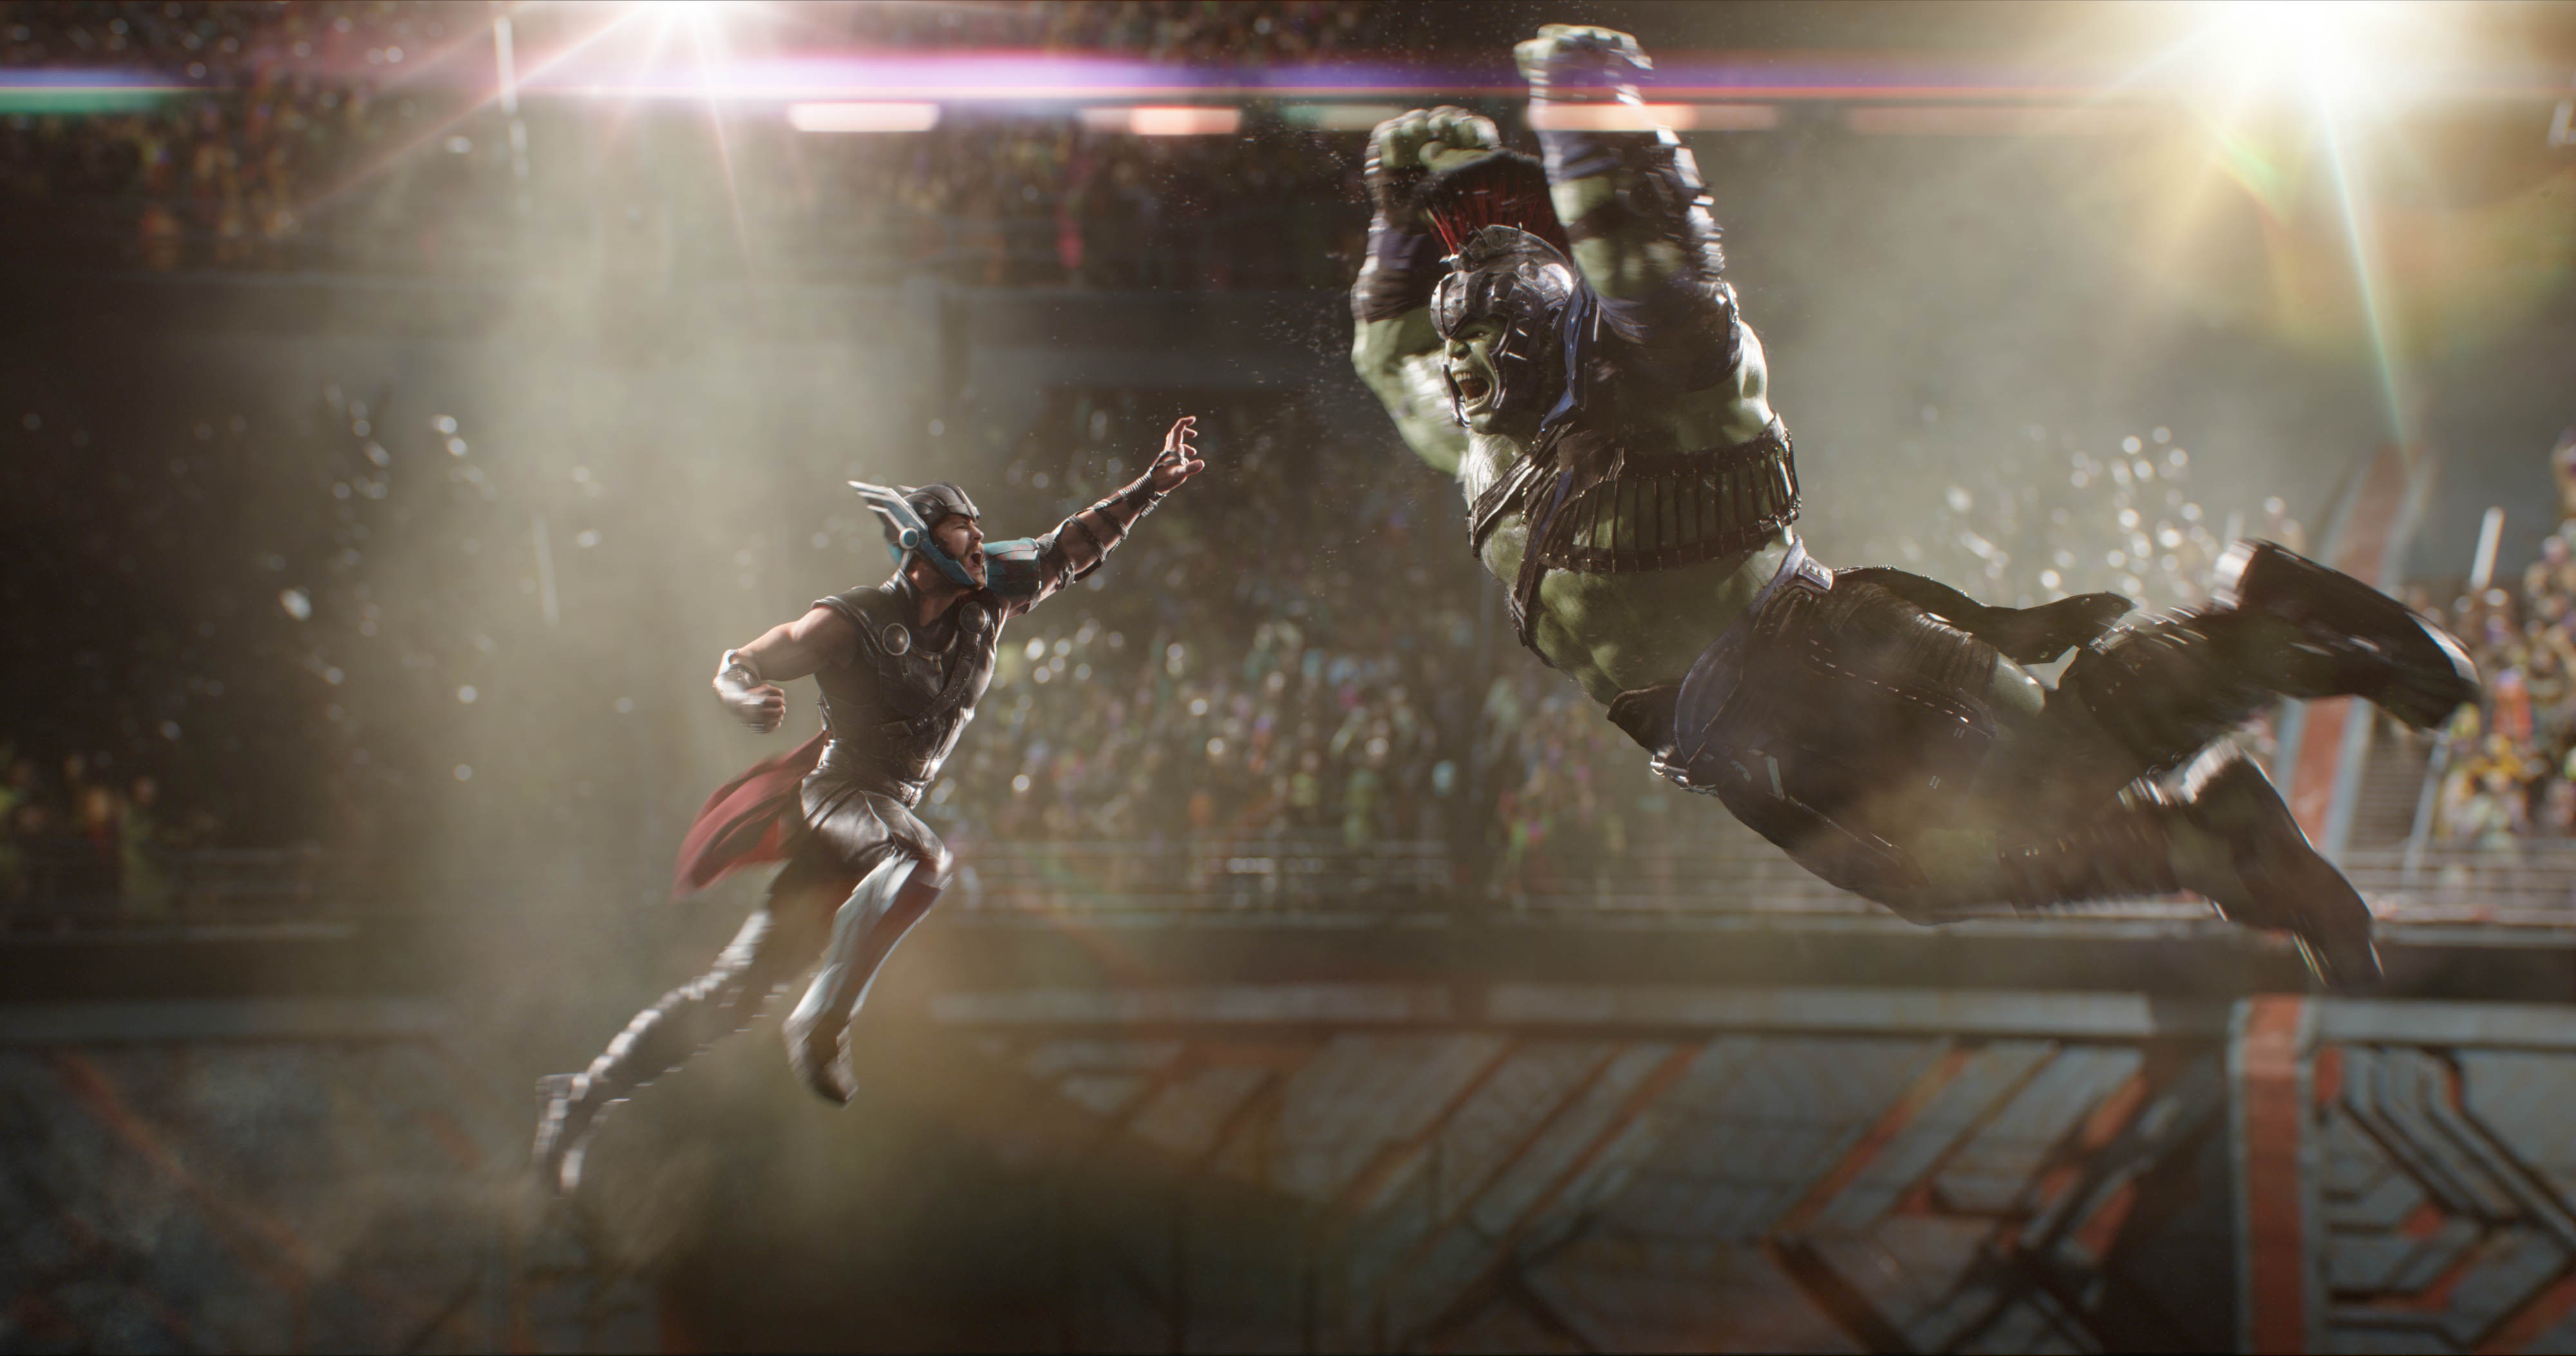 The Sufficient Delights of “Thor: Ragnarok”